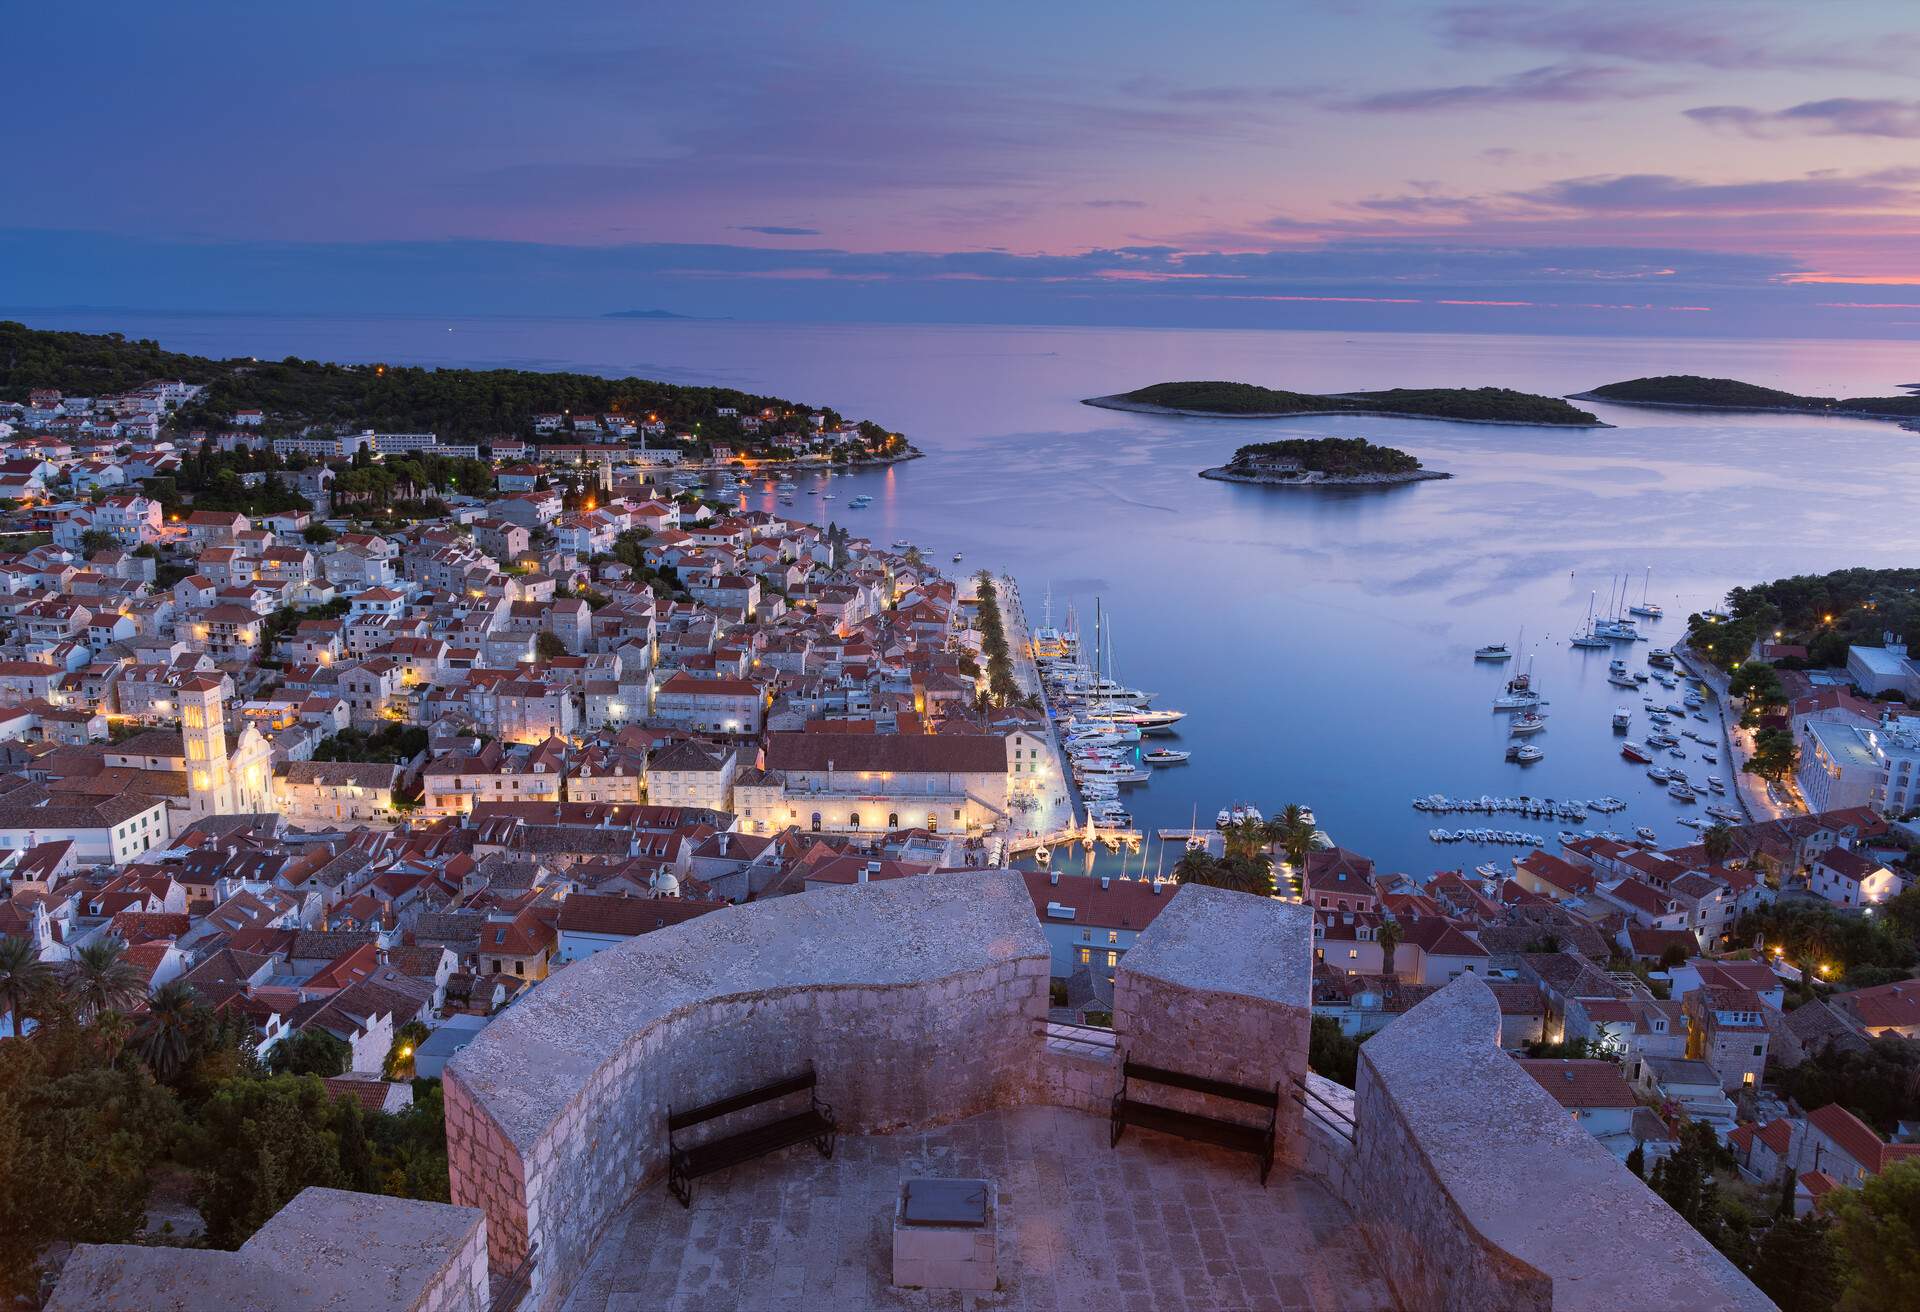 the 16th-century Hvar Spanish Fortress(Tvrdava Fortica) rises above its namesake seaside village. Not long after the castle’s 16th-century completion, it dutifully protected Hvar citizens from attacks by the Turks, and then shortly thereafter was all but destroyed due to fires from a lightening storm. But the fortress was rebuilt, and its Middle Aged walls survived — and all of it stands tall today as arguably Hvar’s most prized sight.